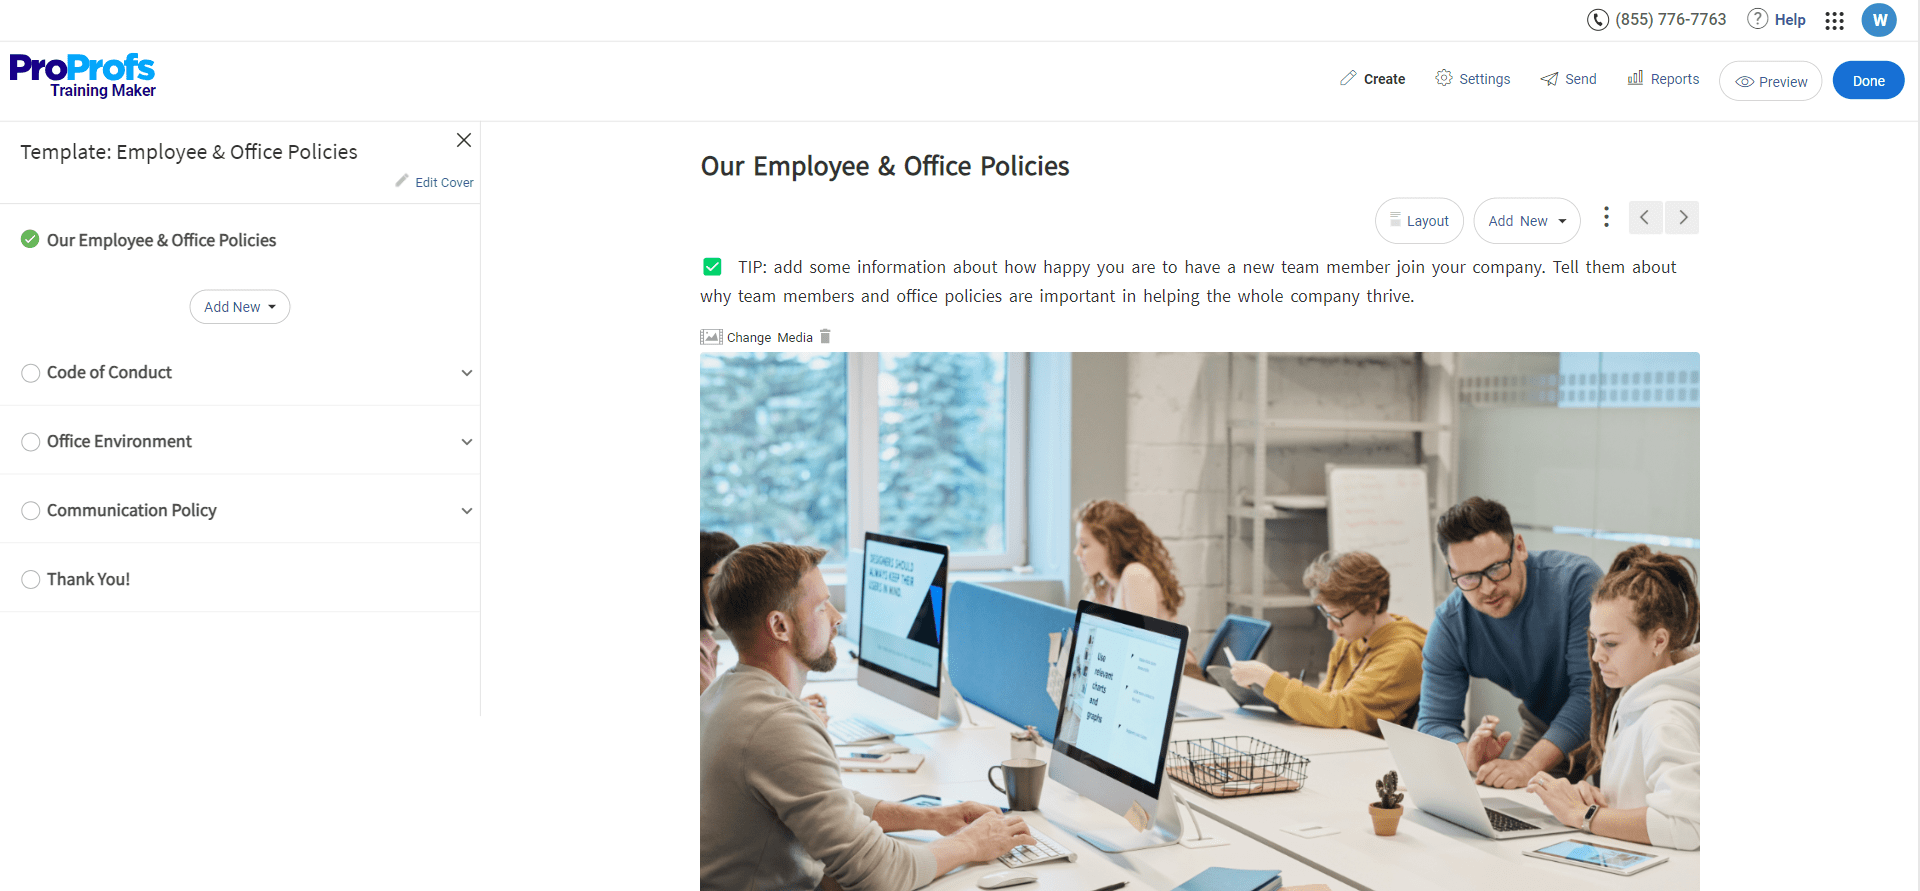 Employee Office Policies 